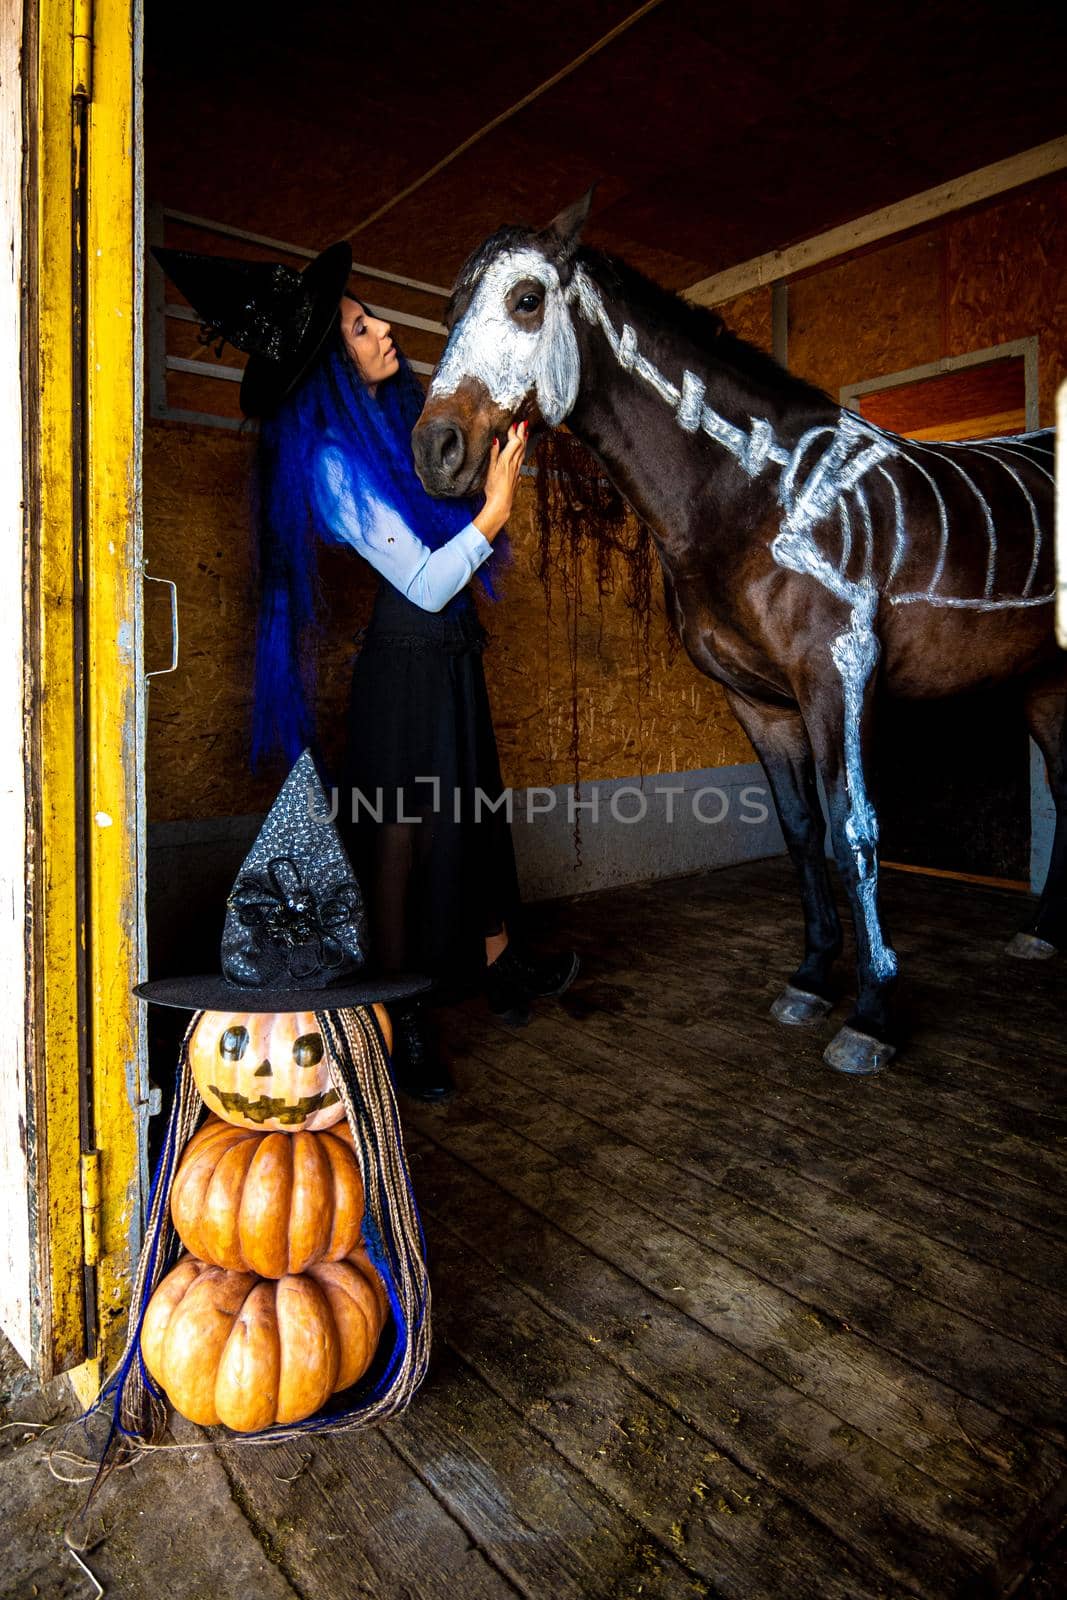 A girl dressed as a witch looks at a horse on which a skeleton is painted in white paint, in the foreground is an evil figurine of pumpkins